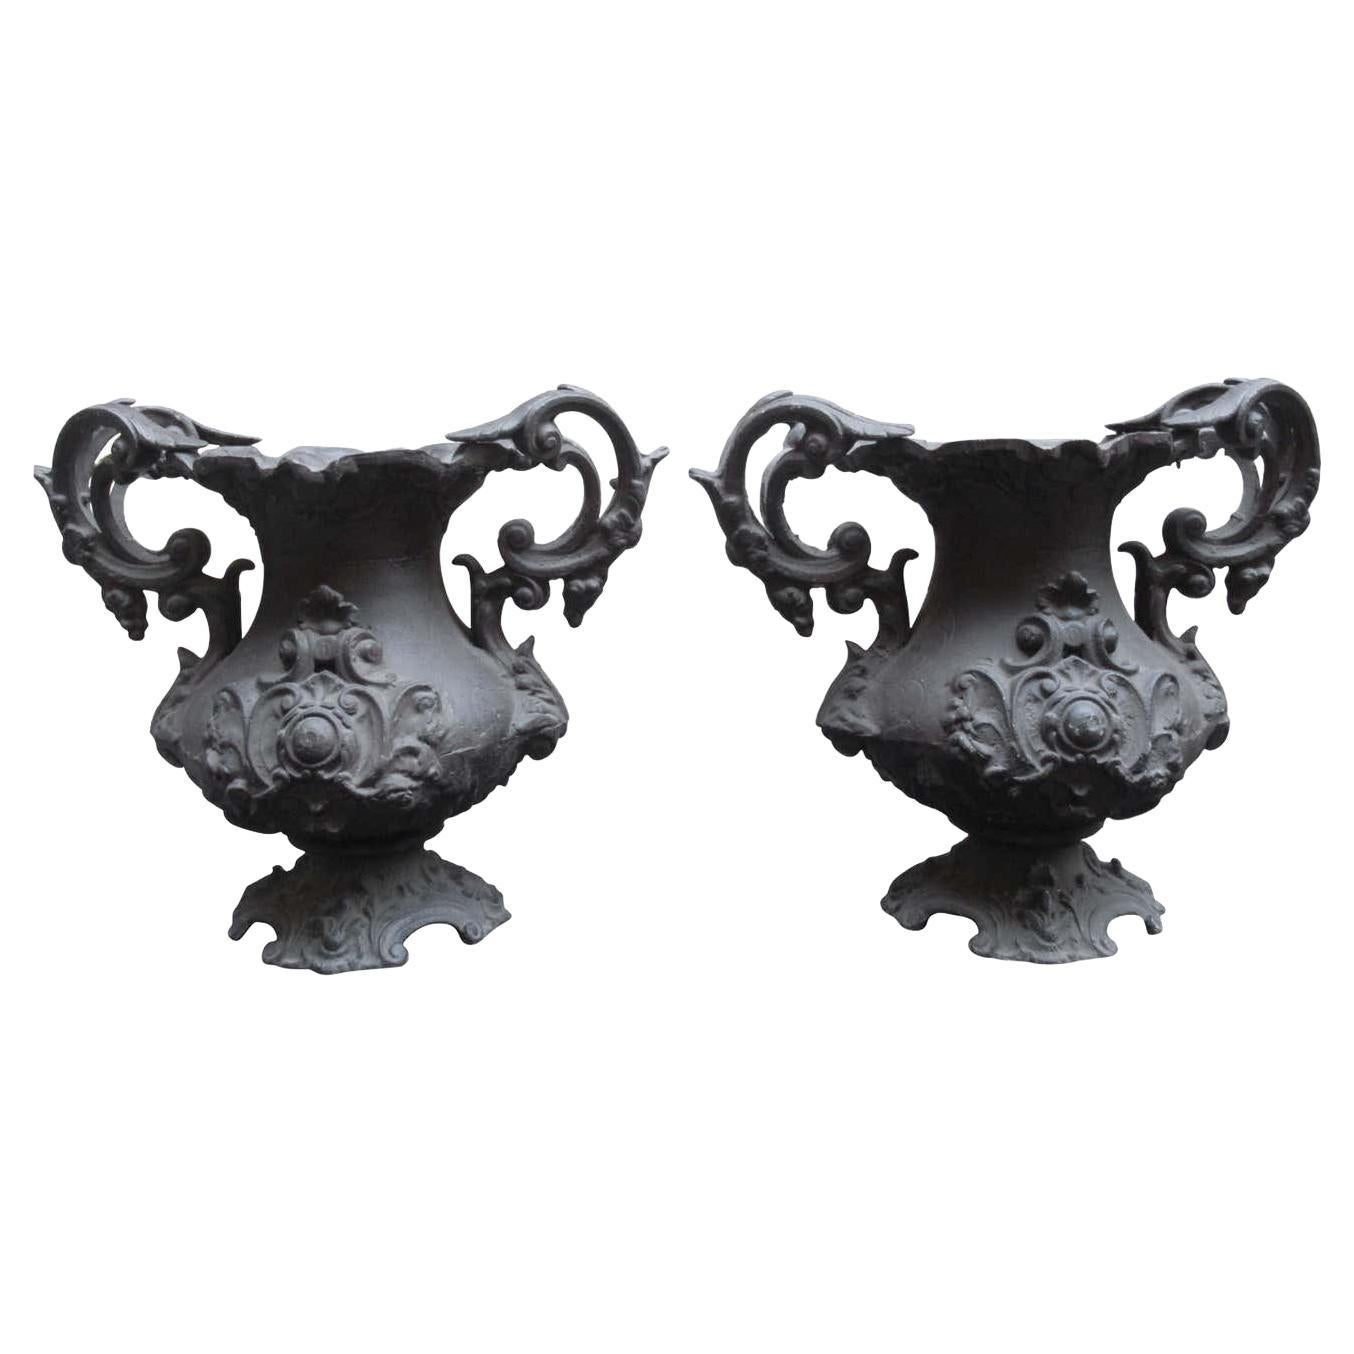 Pair of Early 20th Century Decorative Cast Iron Urns For Sale